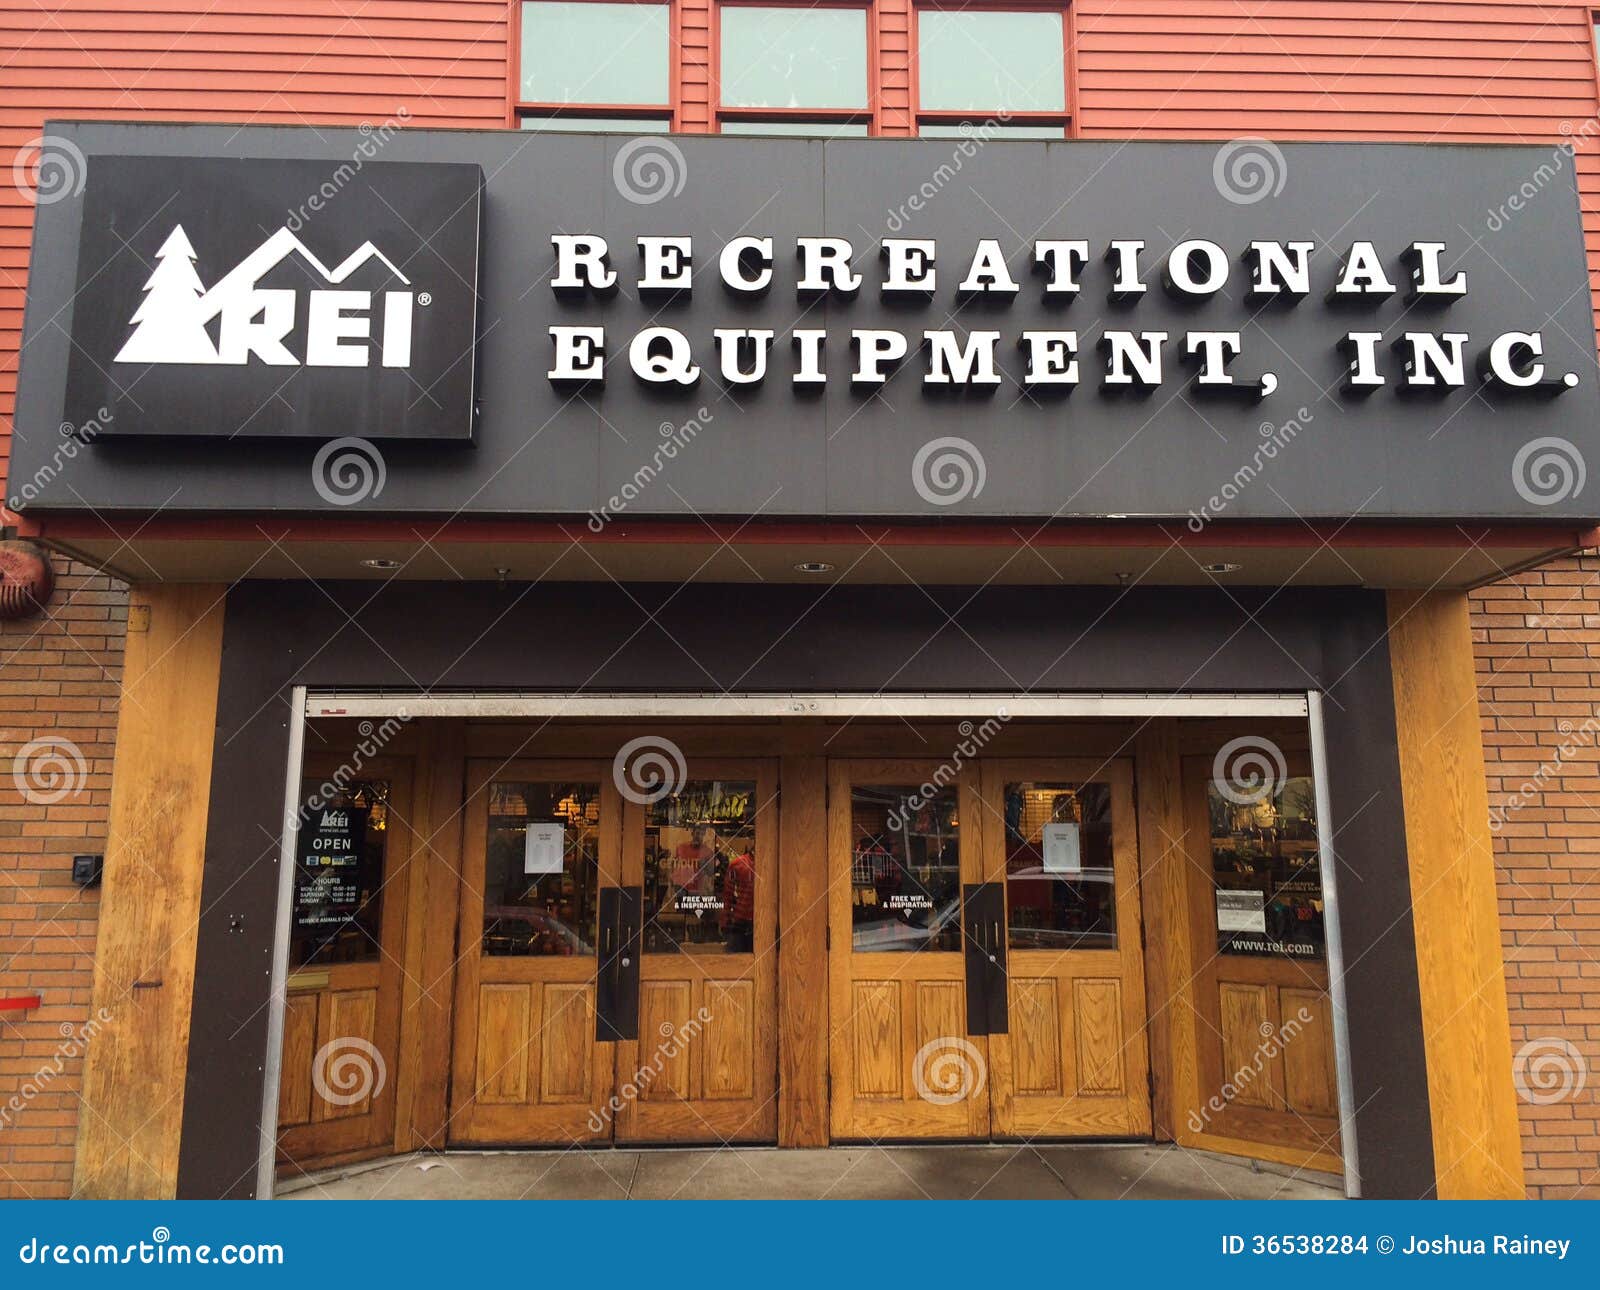 2014: REI Recreational Equipment, Inc. store entrance and sign. REI ...